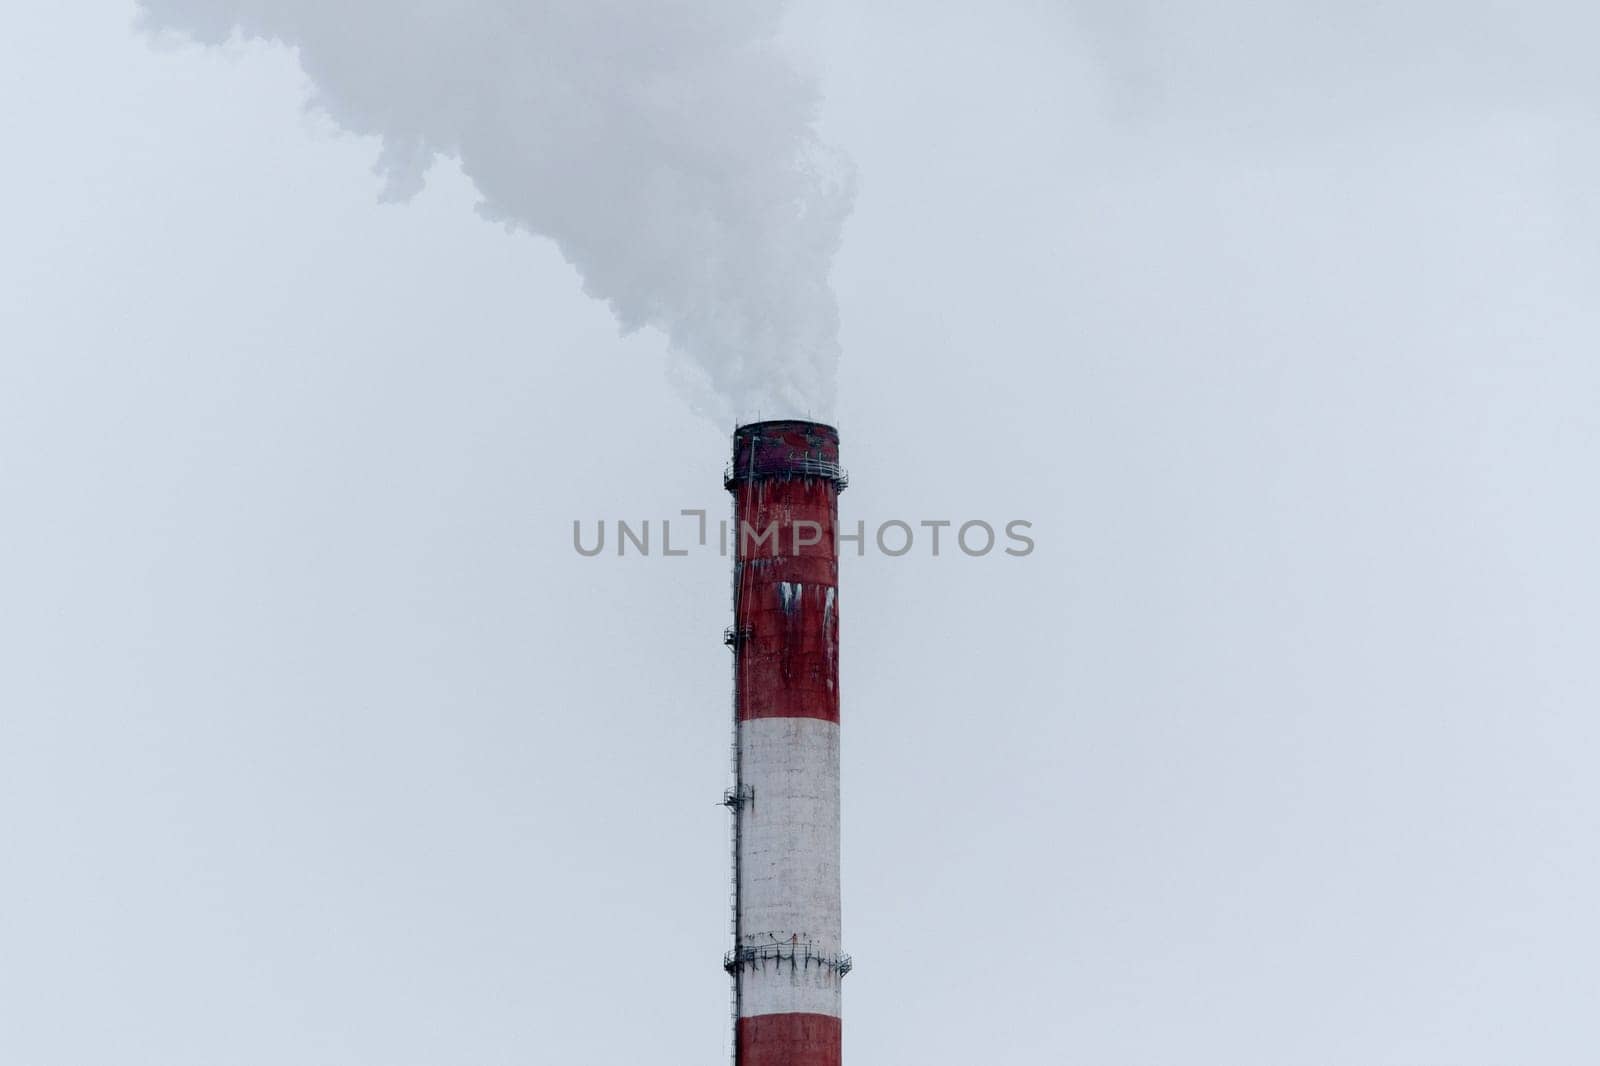 Pipe of a thermal power plant expels a dramatic plume of steam into the overcast sky, highlighting the intersection of industry and the environment. by darksoul72